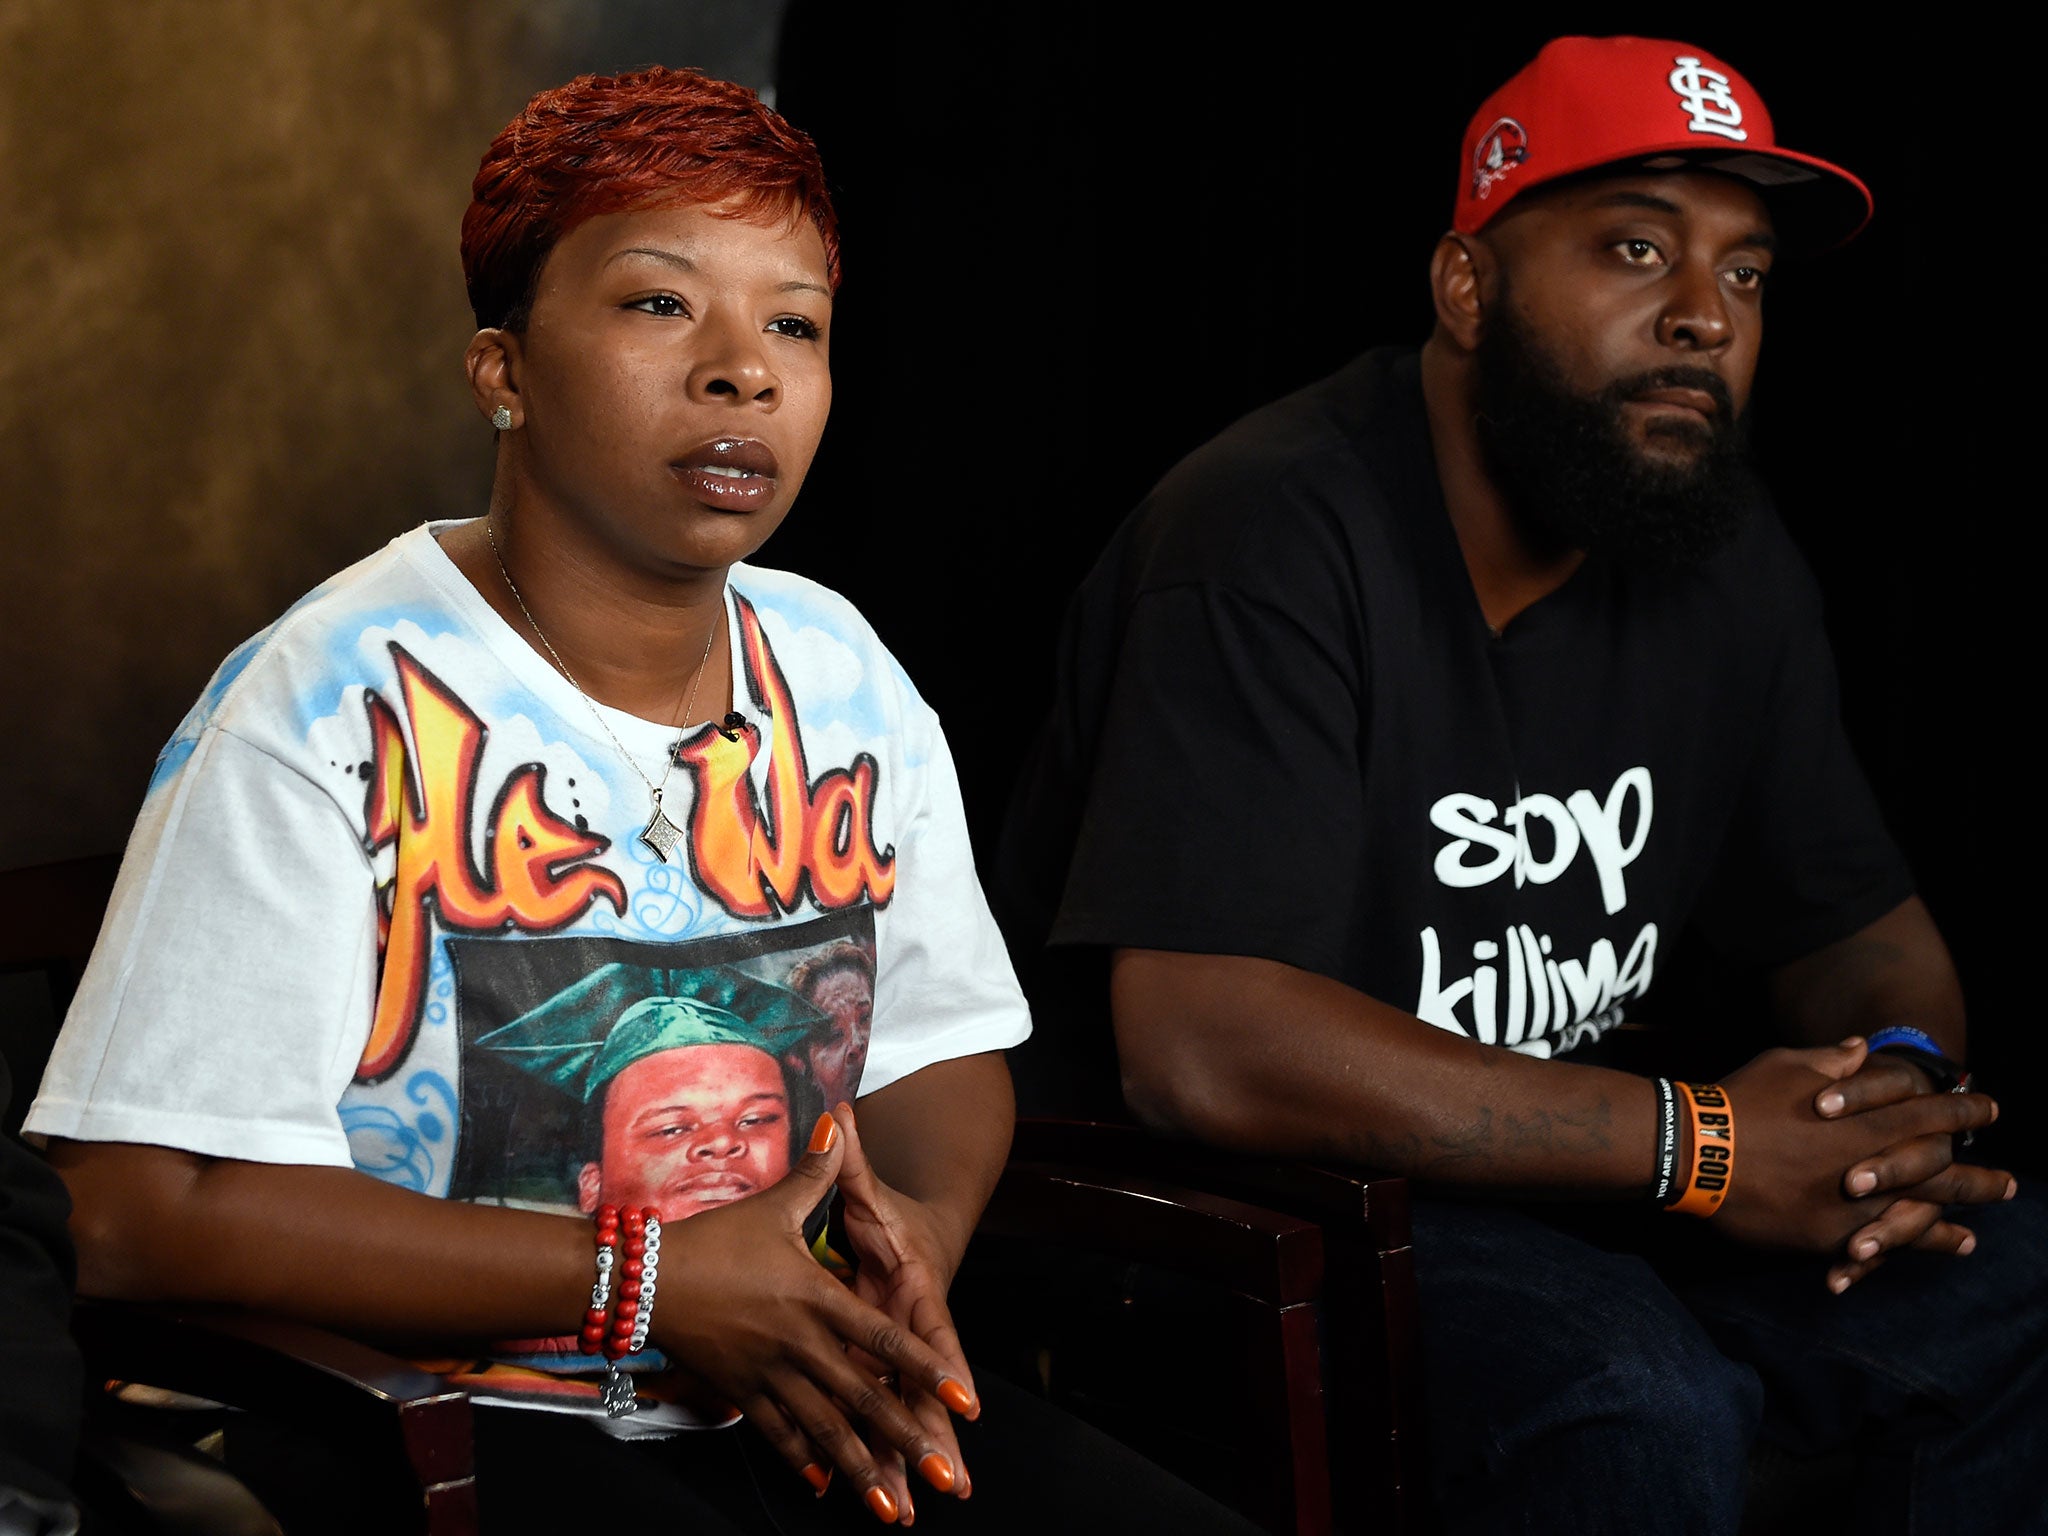 Michael Brown’s parents have rejected a police apology